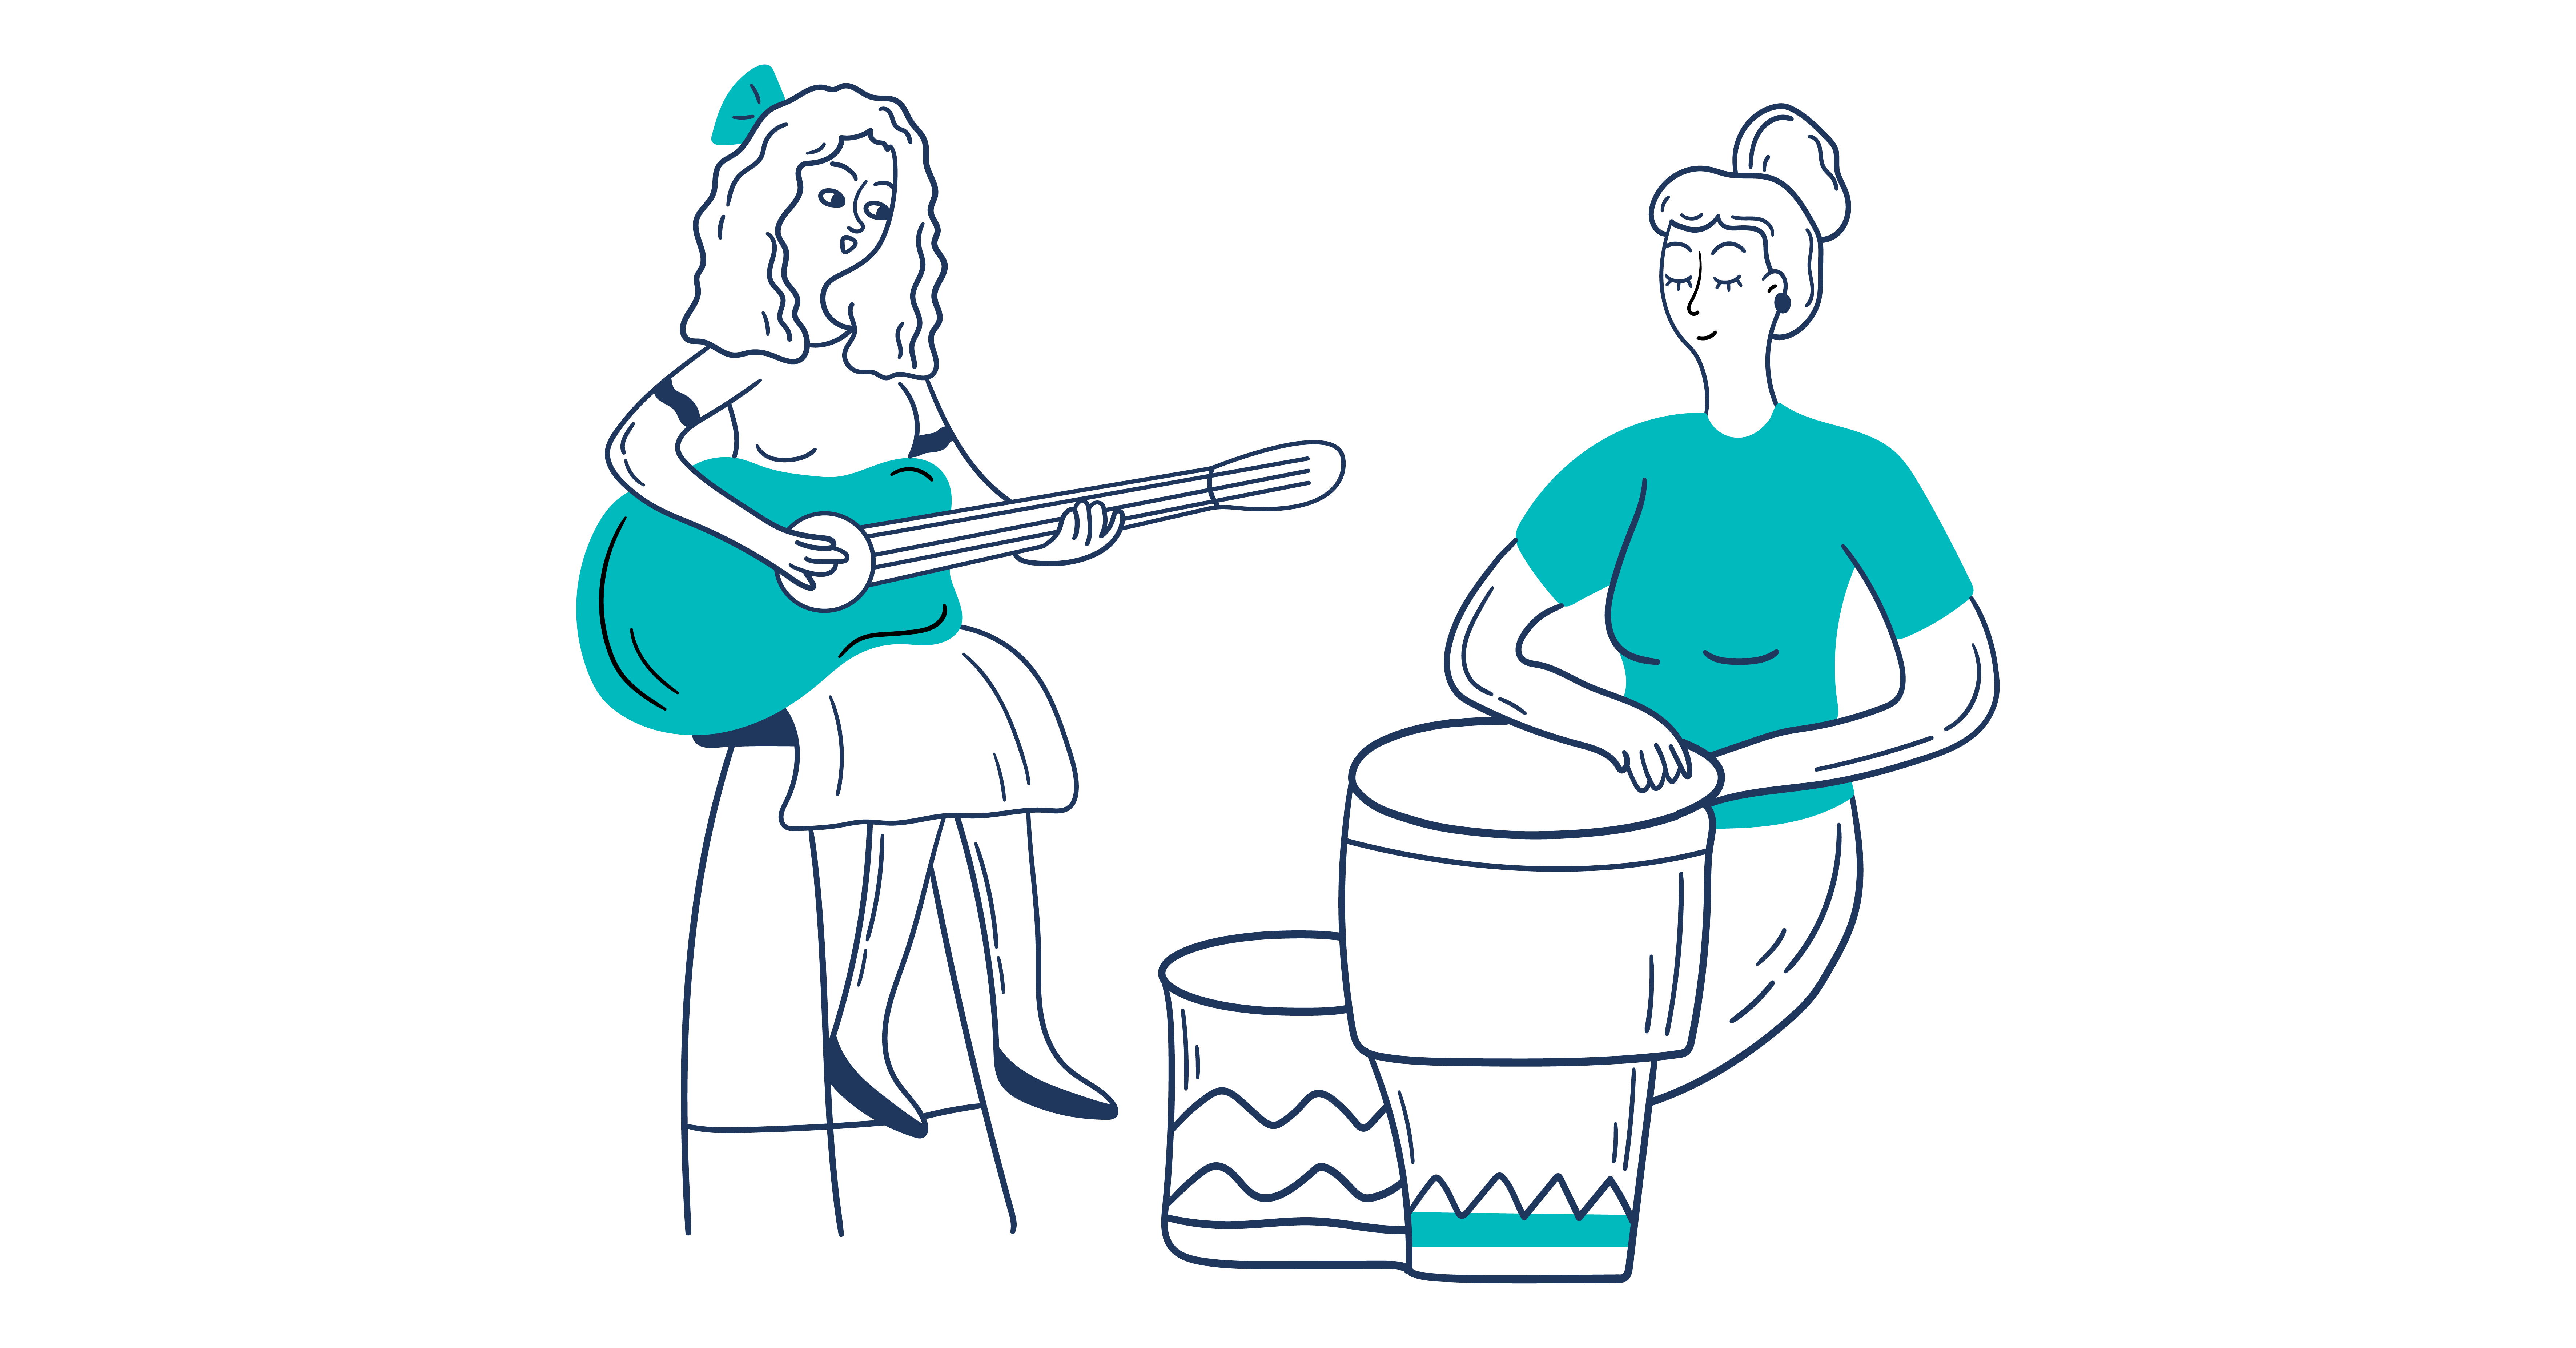 Illustration of two smiling women facing each other making music together. The woman on the left is sitting on a chair playing the guitar and the woman on the right is sitting on the floor playing bongo drums with her hands.